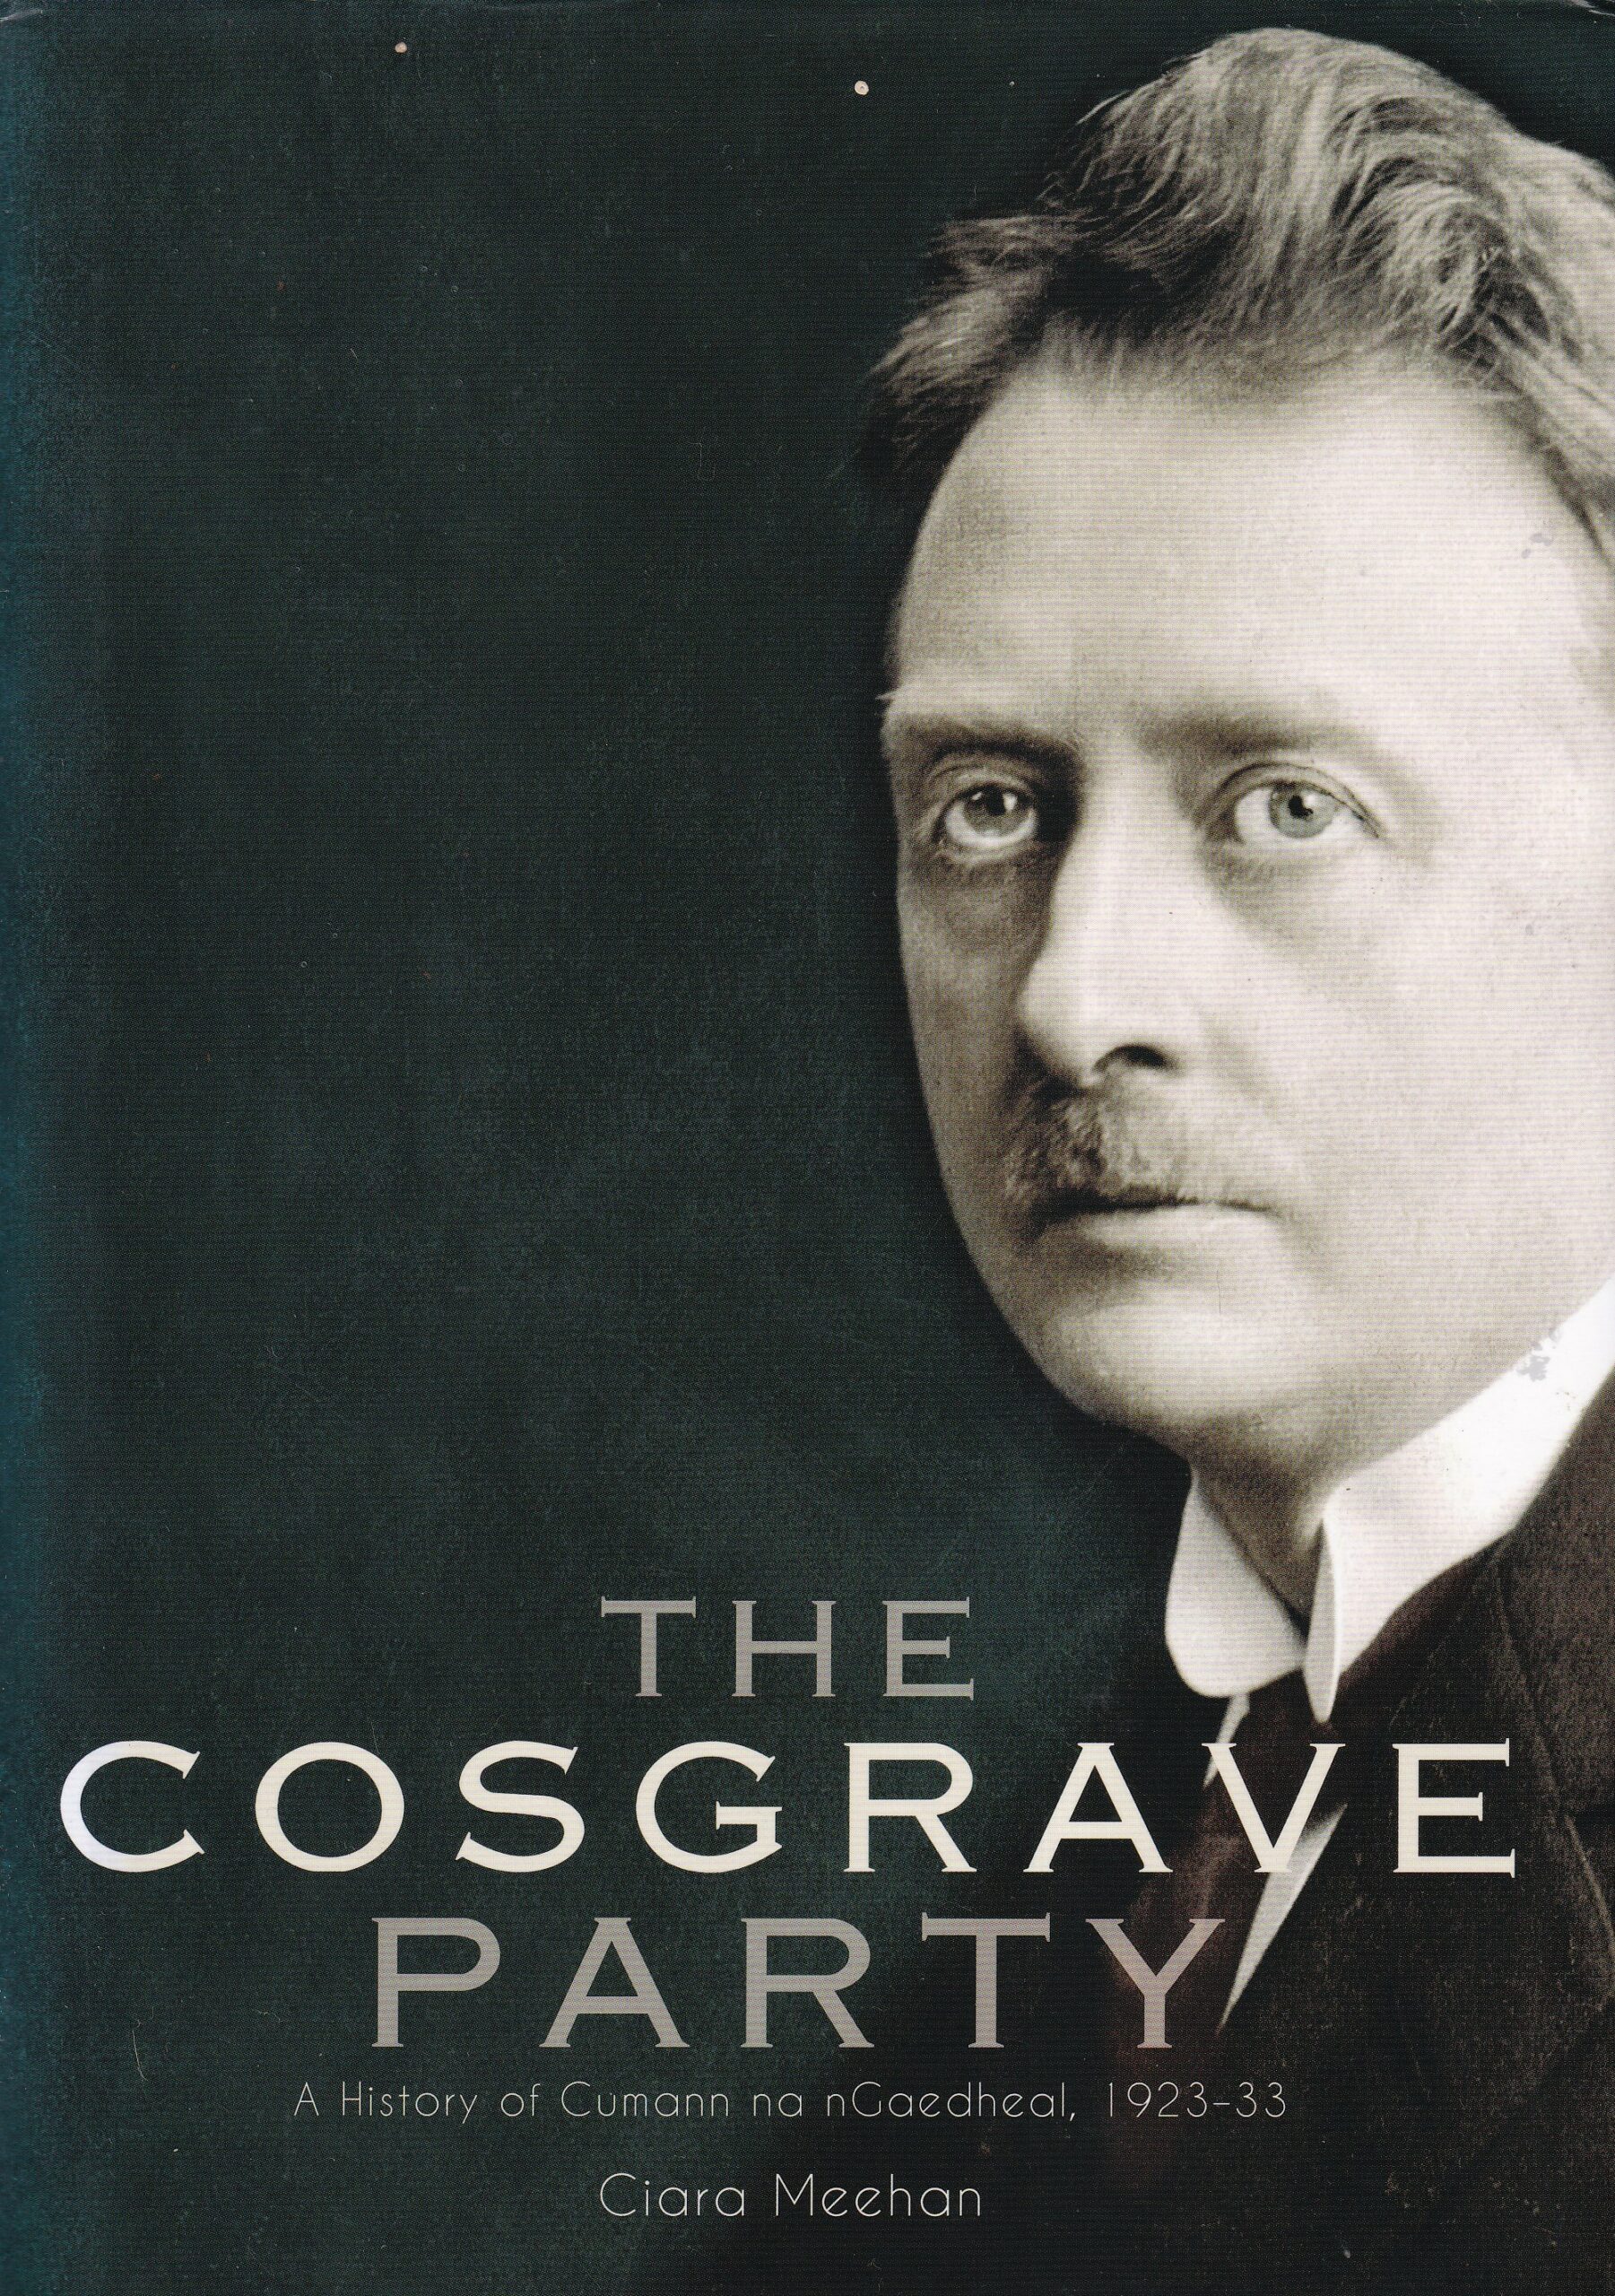 The Cosgrave Party: A History of Cumann na nGaedheal, 1923-33 by Ciara Meehan